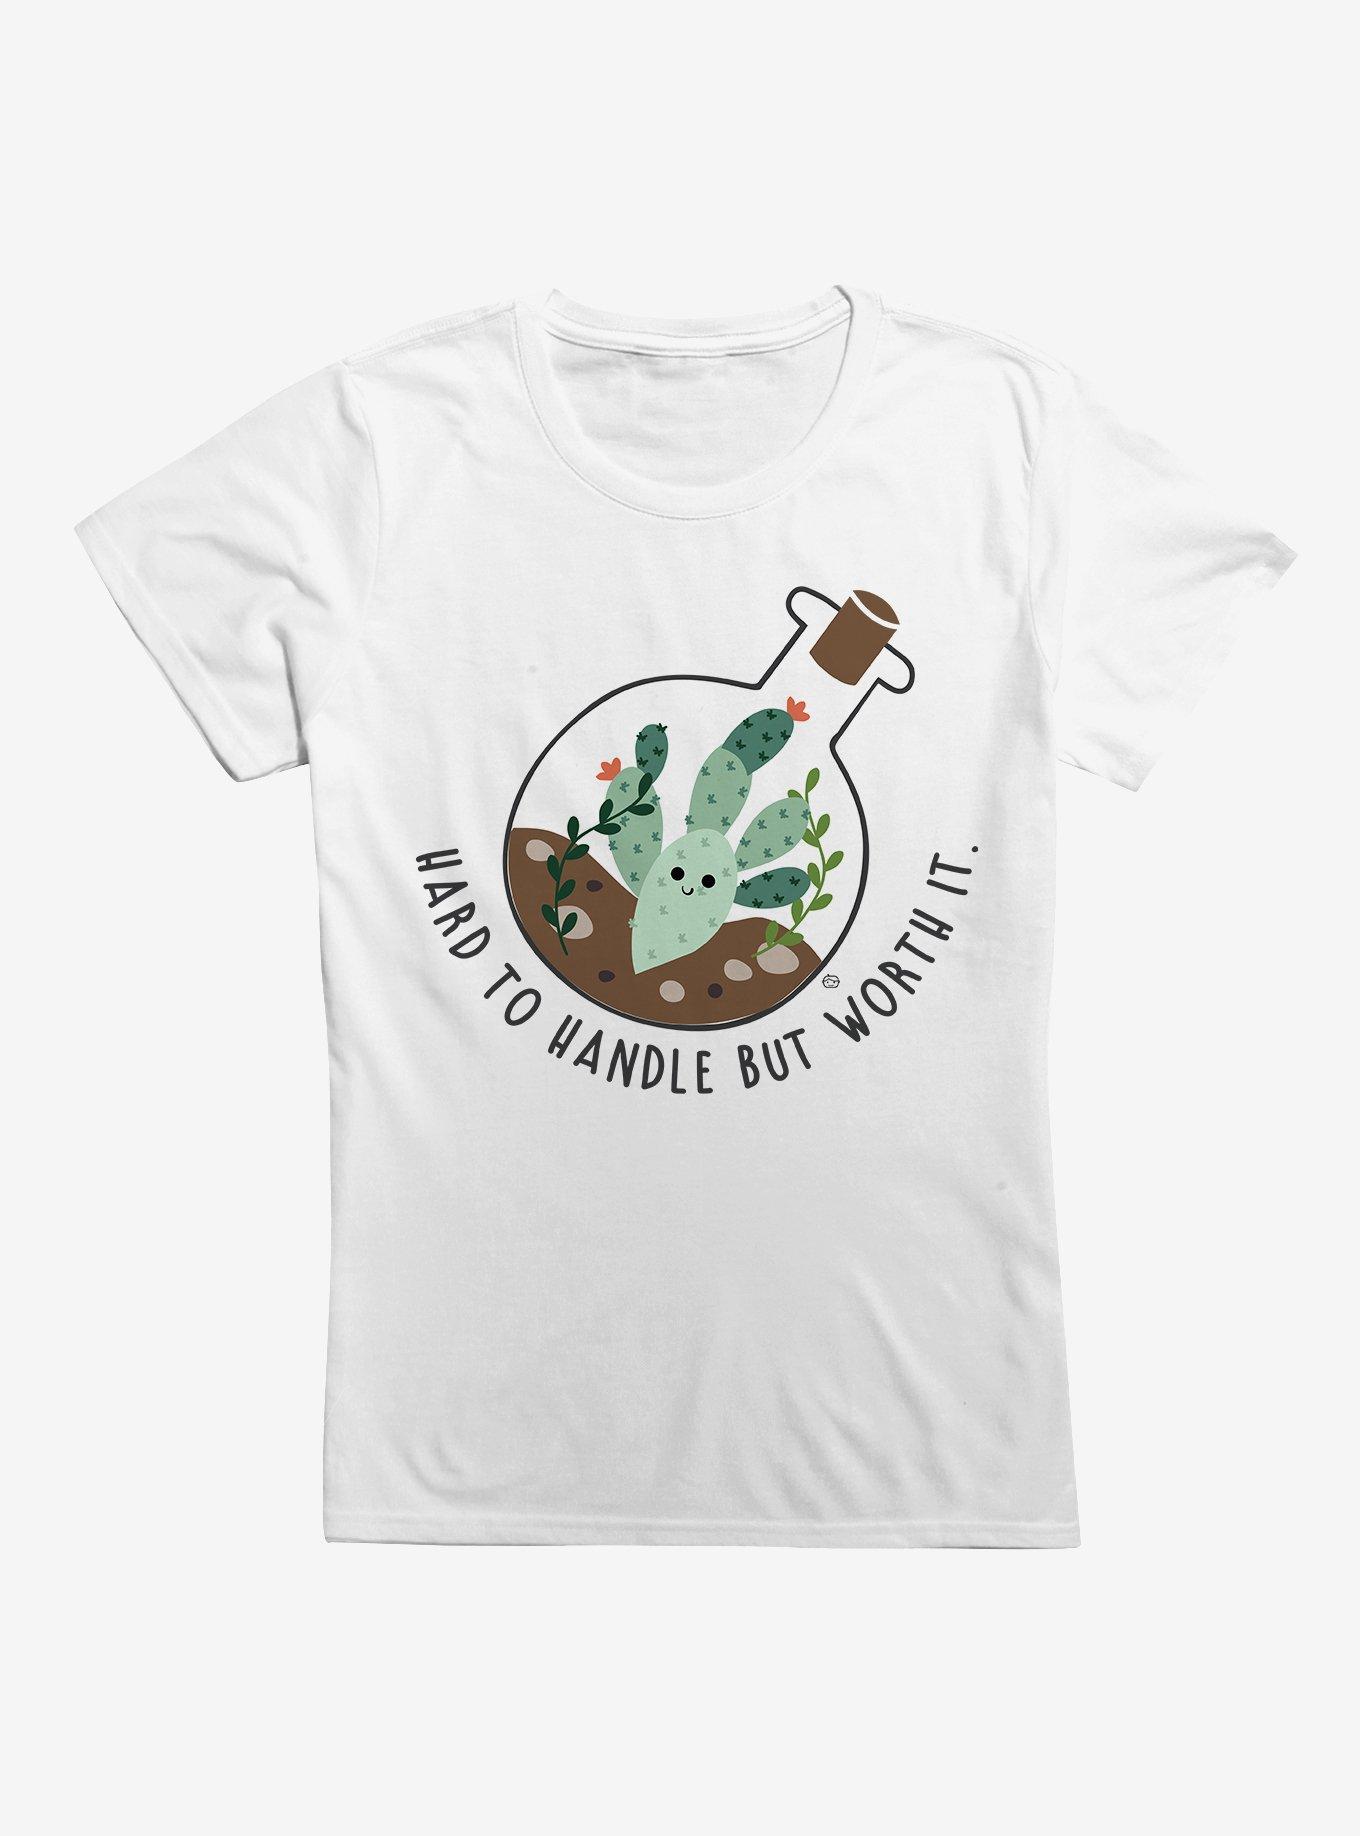 Hard To Handle But Worth It Womens T-Shirt, WHITE, hi-res